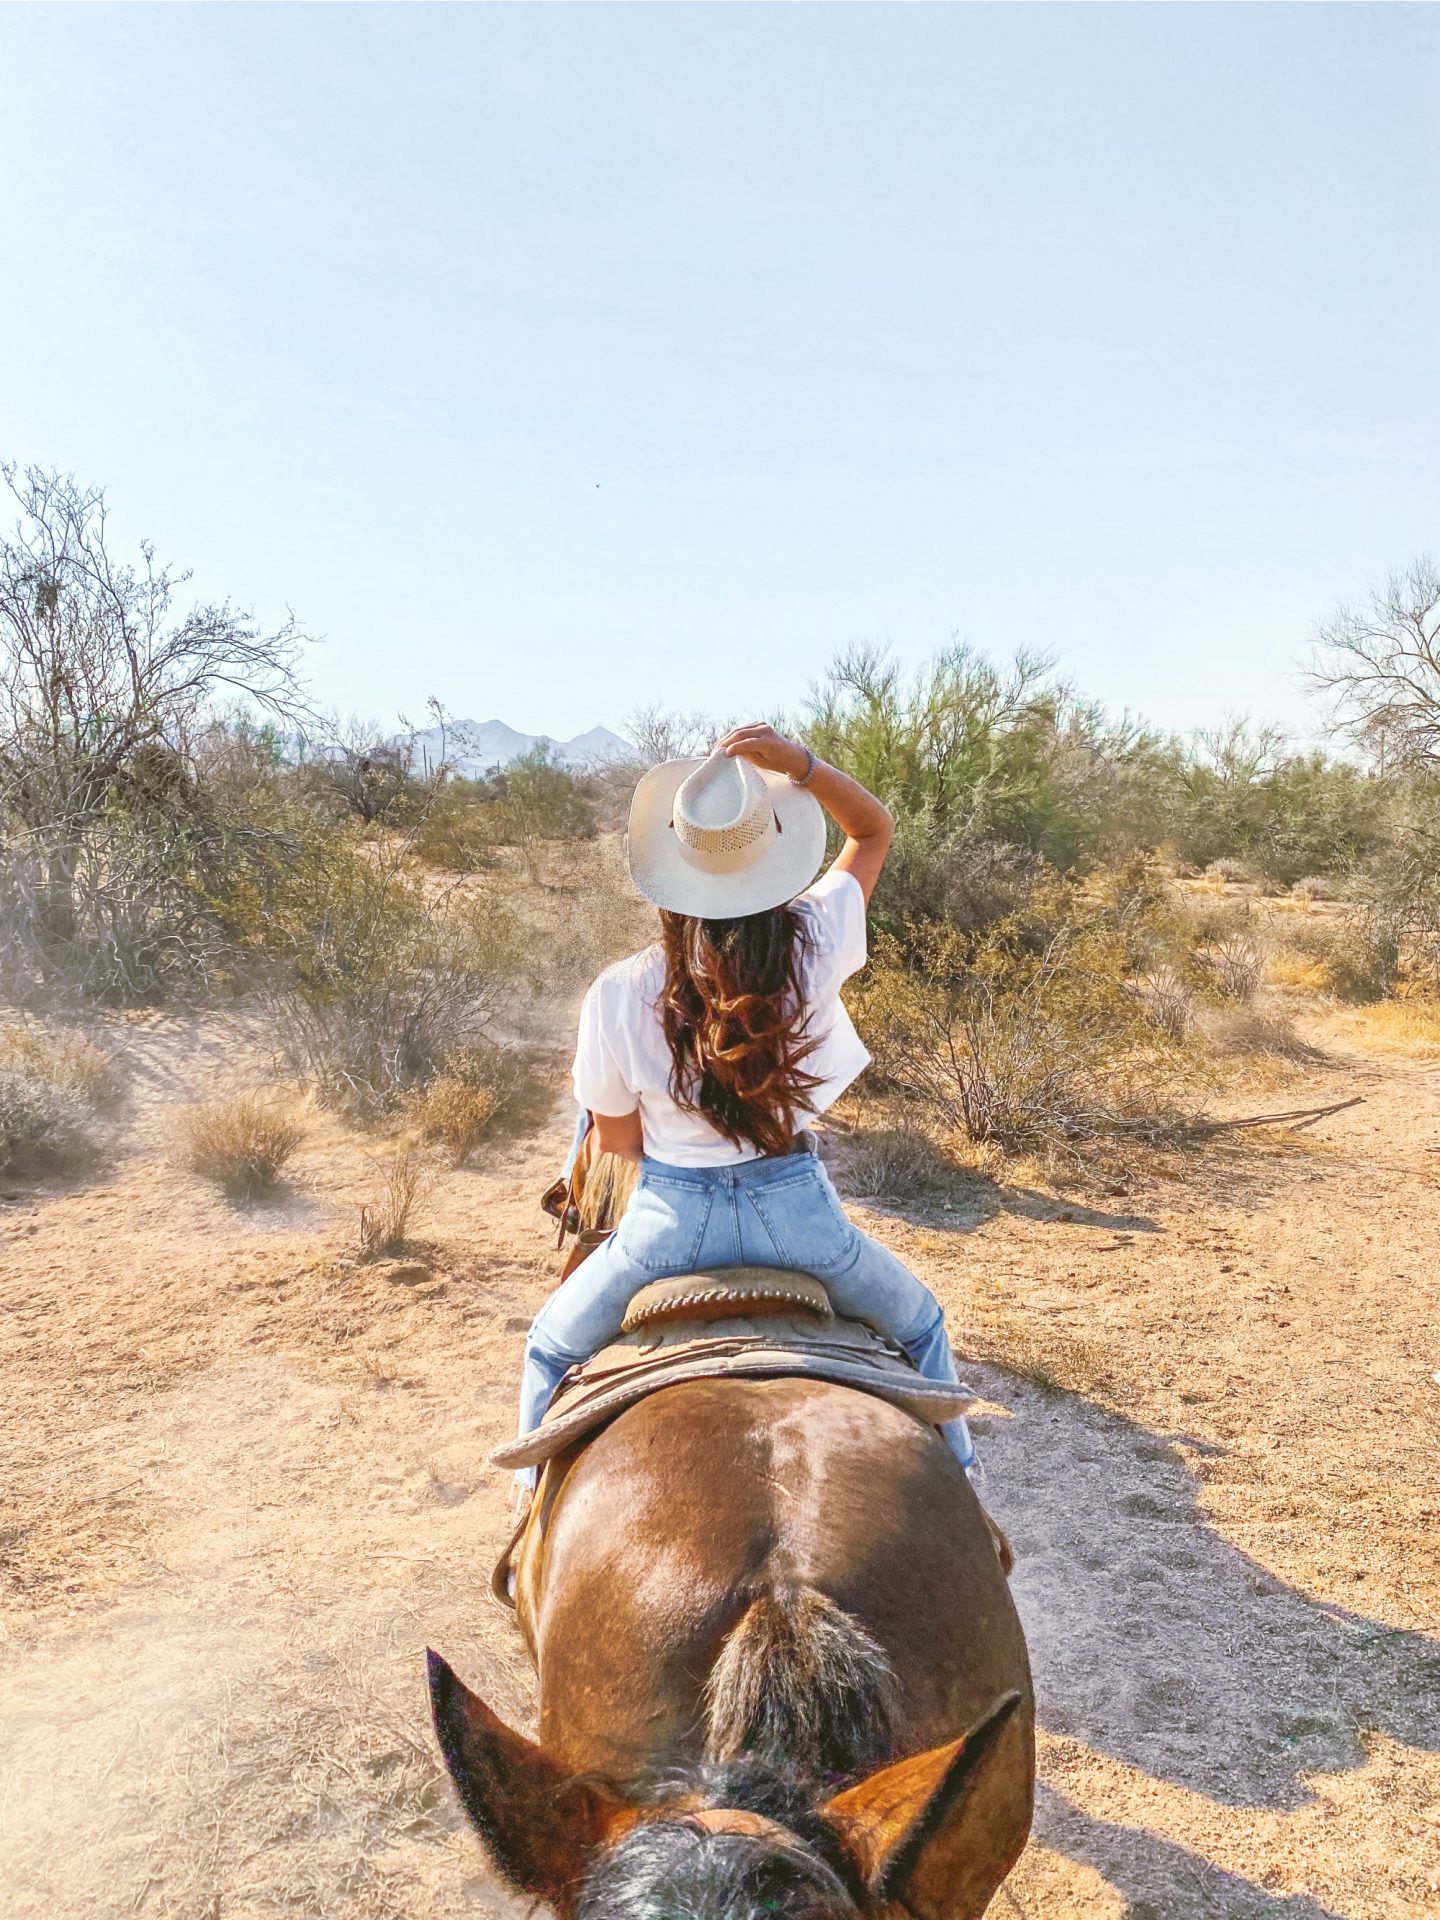 what to do in scottsdale Arizona, ultimate travel guide scottsdale Arizona, traveling, scottsdale, Macdonalds ranch, cactus, dessert, horseback riding, cowgirl, horseback riding, things to do, Arizona, travel blogger, photography, ranch, guide to scottsdale